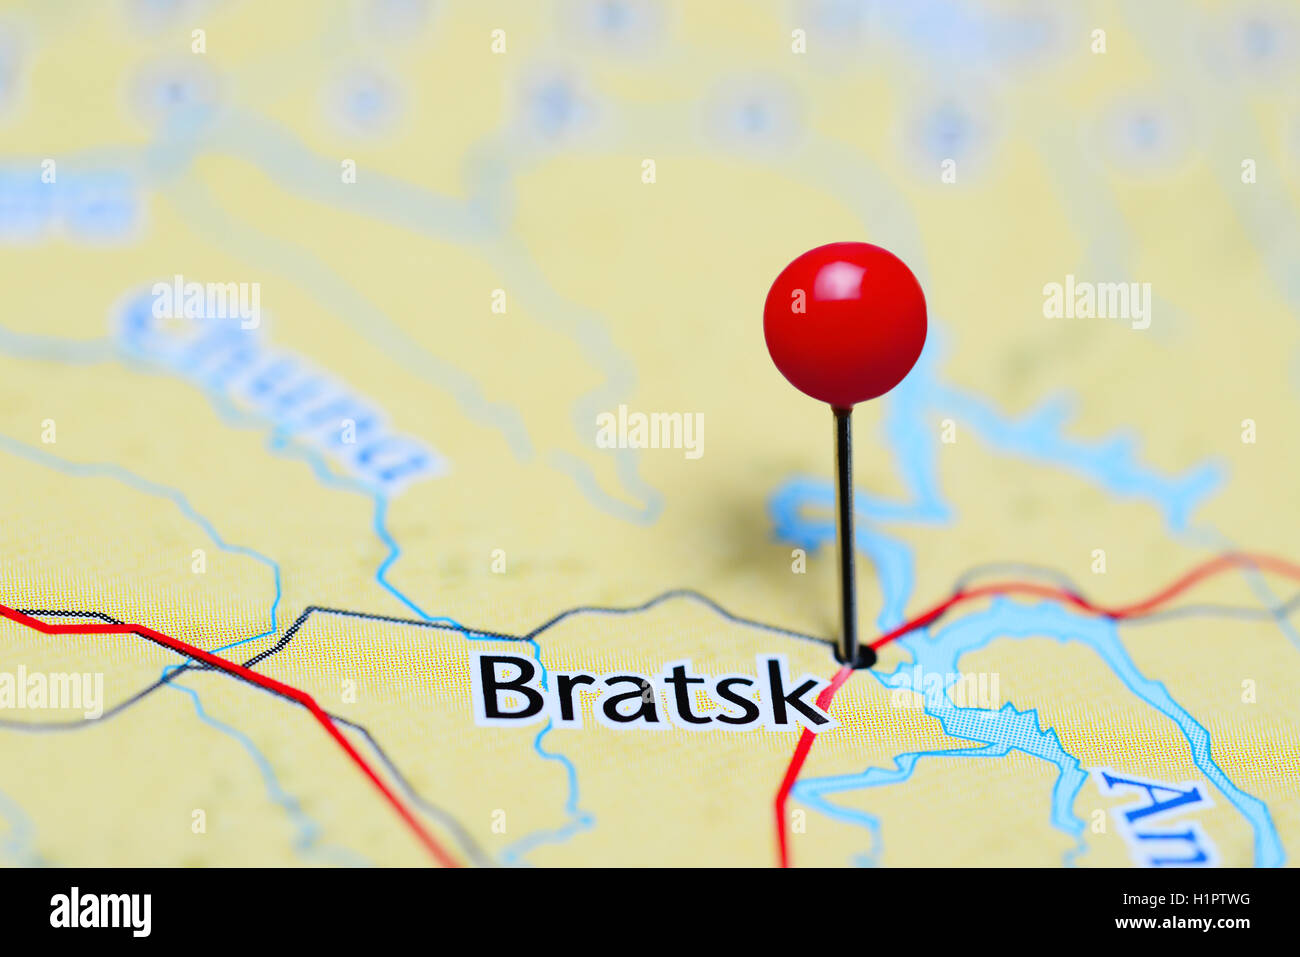 Bratsk pinned on a map of Russia Stock Photo